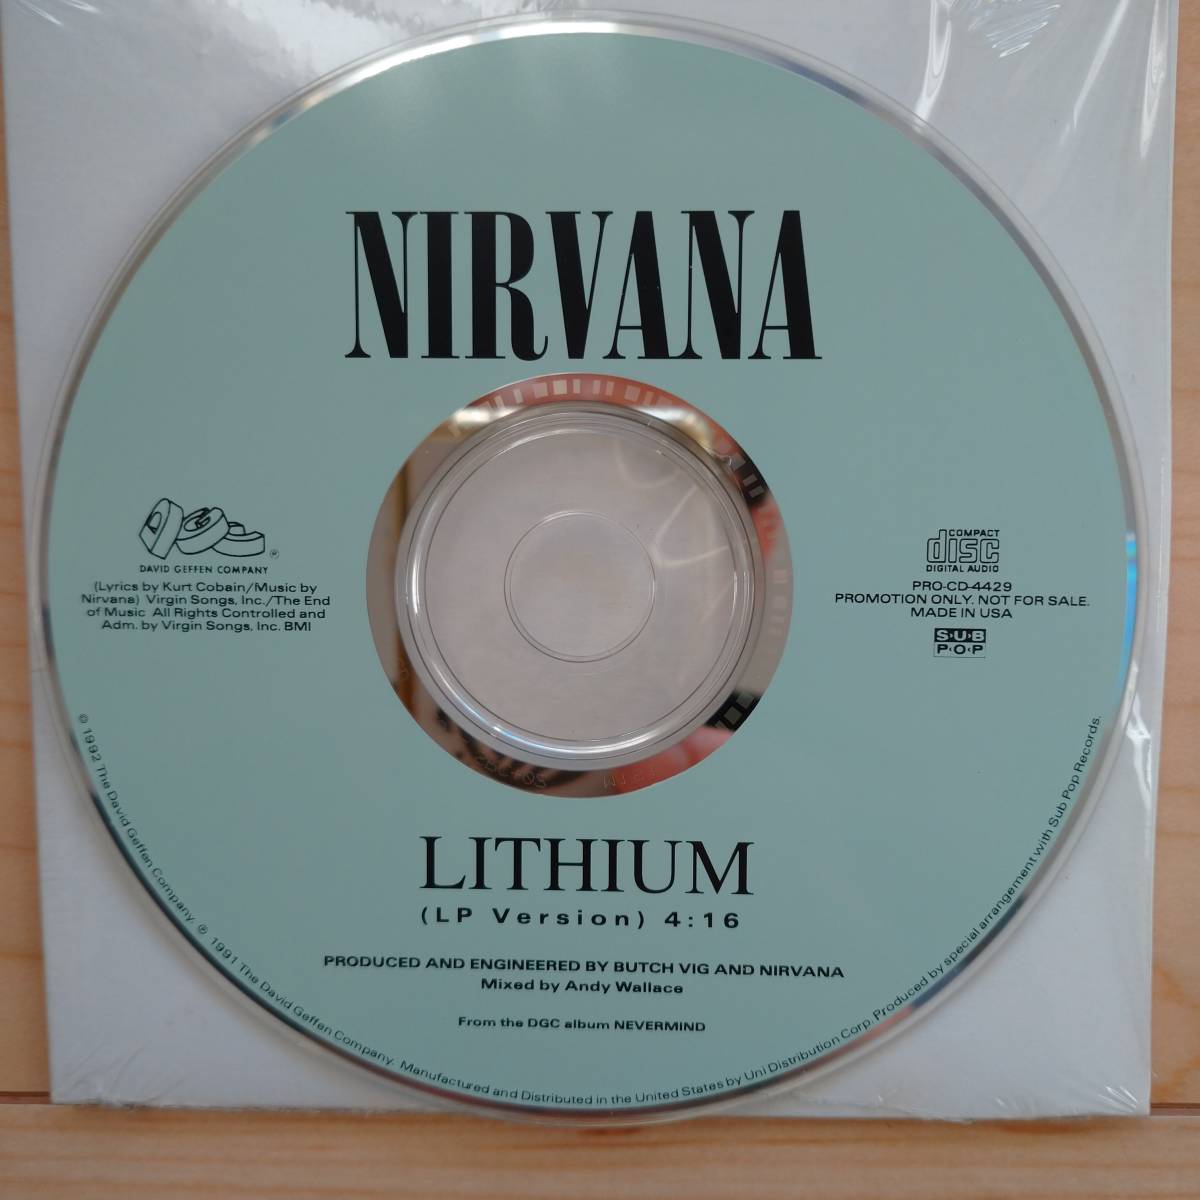 NIRVANA / LITHIUM / PROMOTION ONLY SINGLE CD プロモ Not For Sale 非売品 ニルヴァーナ リチウム_画像1